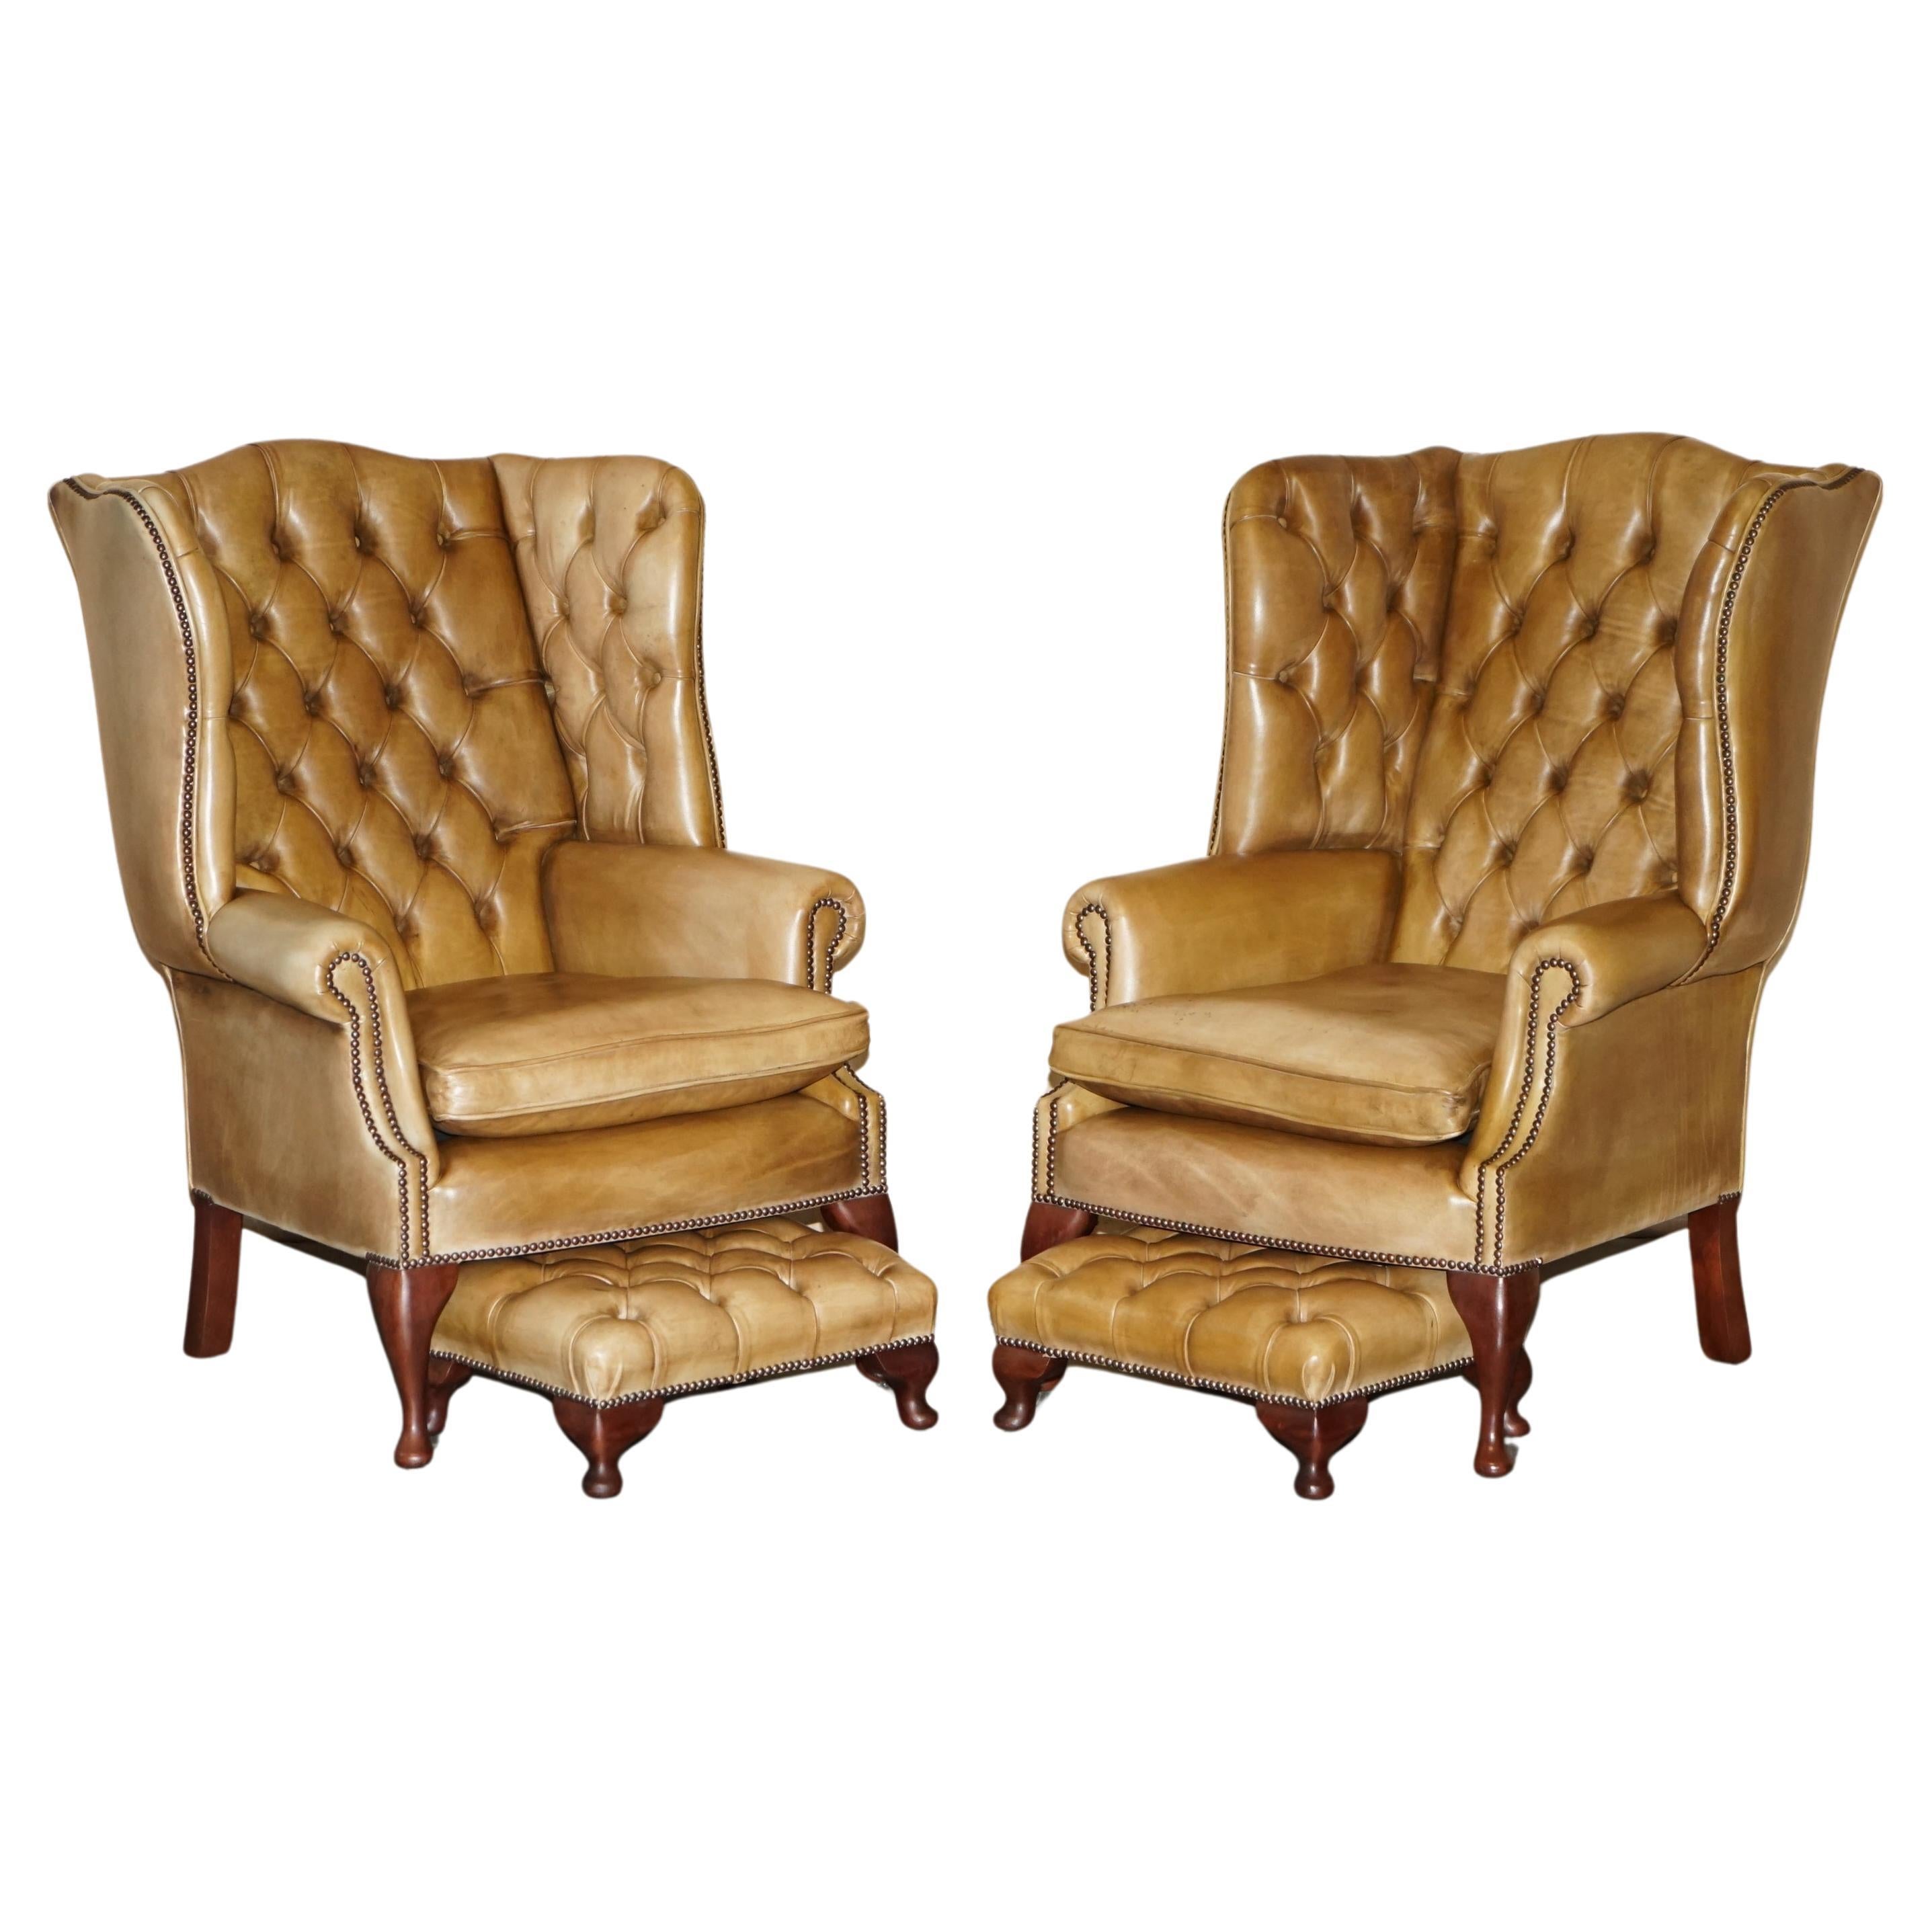 PAIR OF VINTAGE Tan BROWN LEATHER CHESTERFiELD WINGBACK CHAIRS WITH FOOTSTOOLS im Angebot